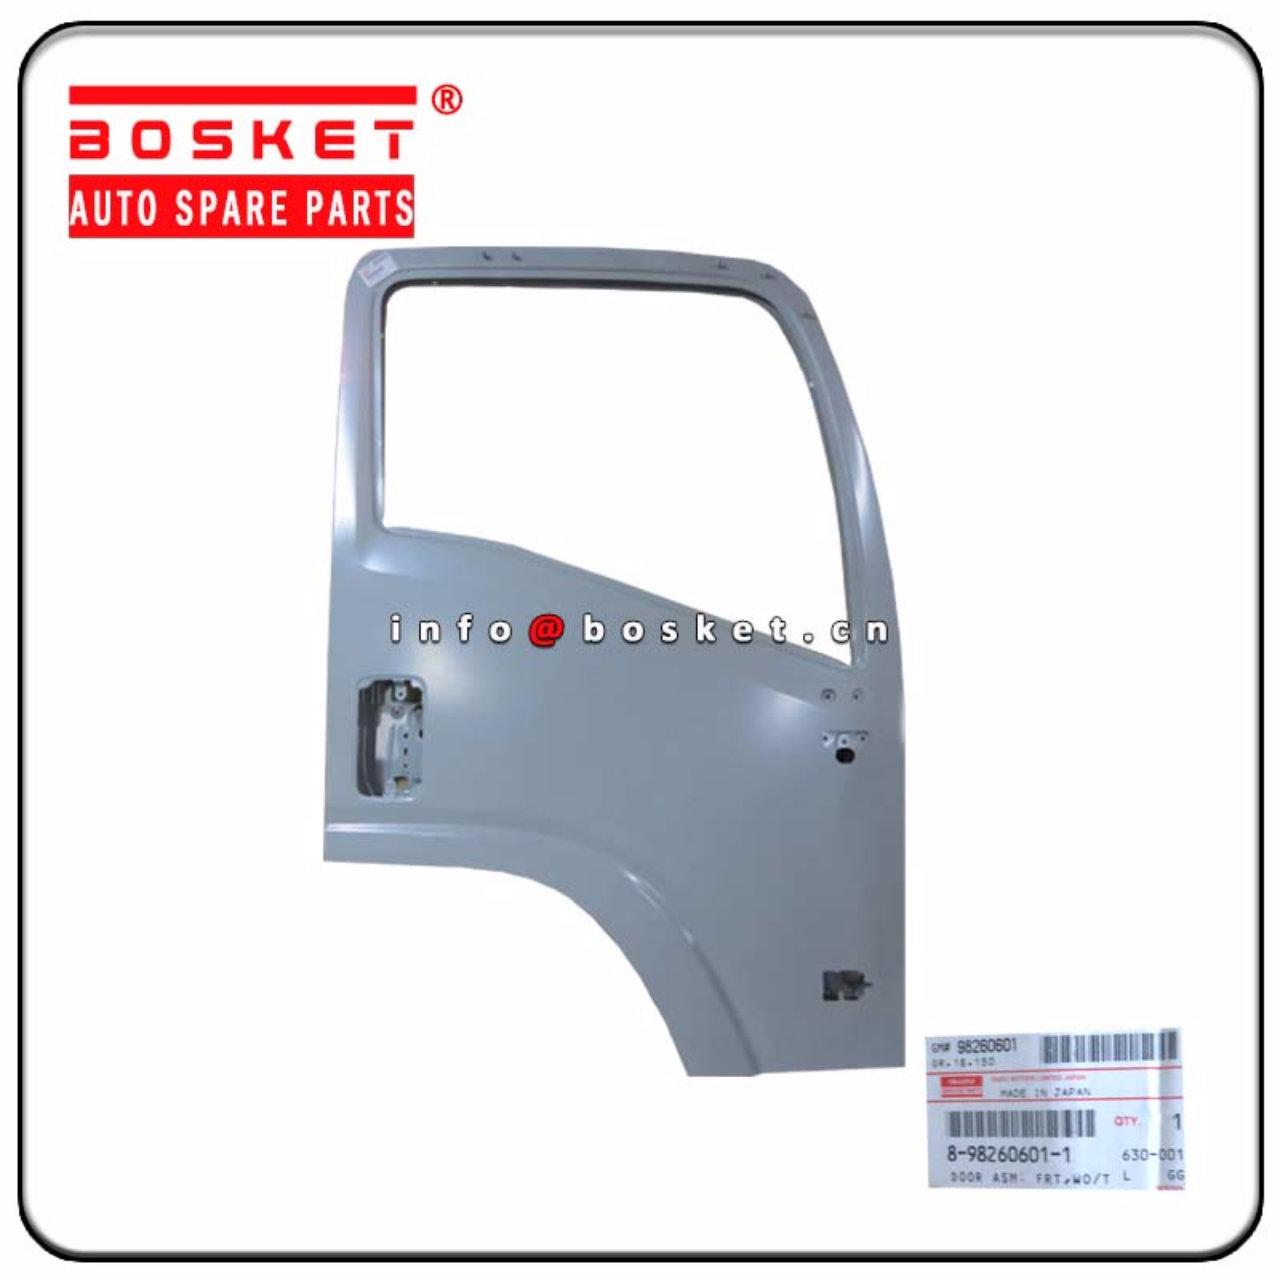 8-98260601-1 8982606011 Without Trim Door Assembly Suitable for ISUZU NPR